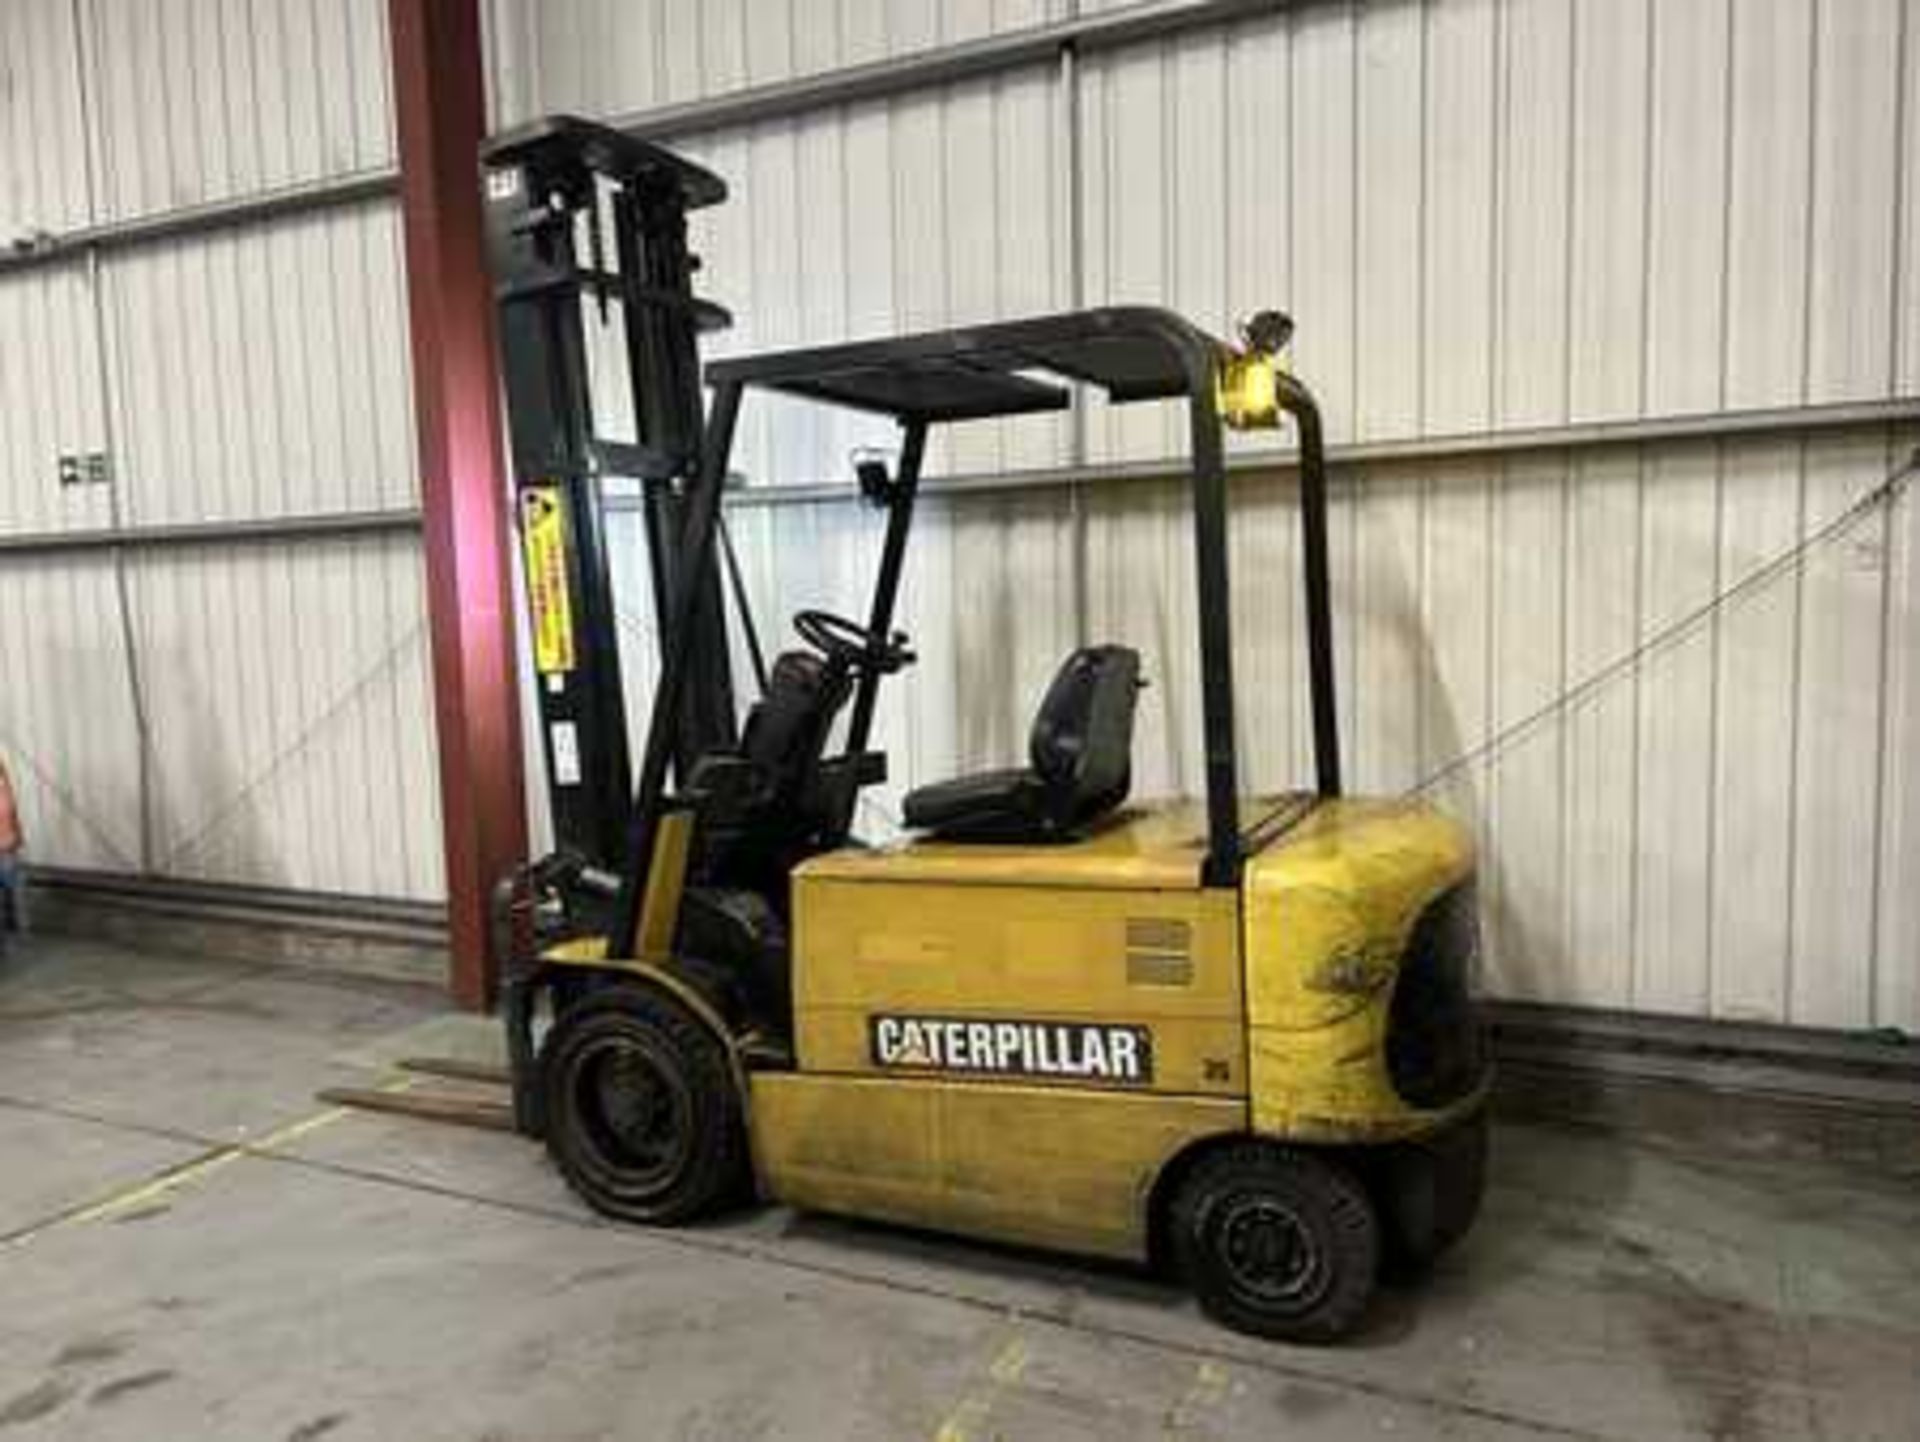 CAT ELECTRIC FORKLIFT - EP35K-PAC, 2014 - Image 3 of 6